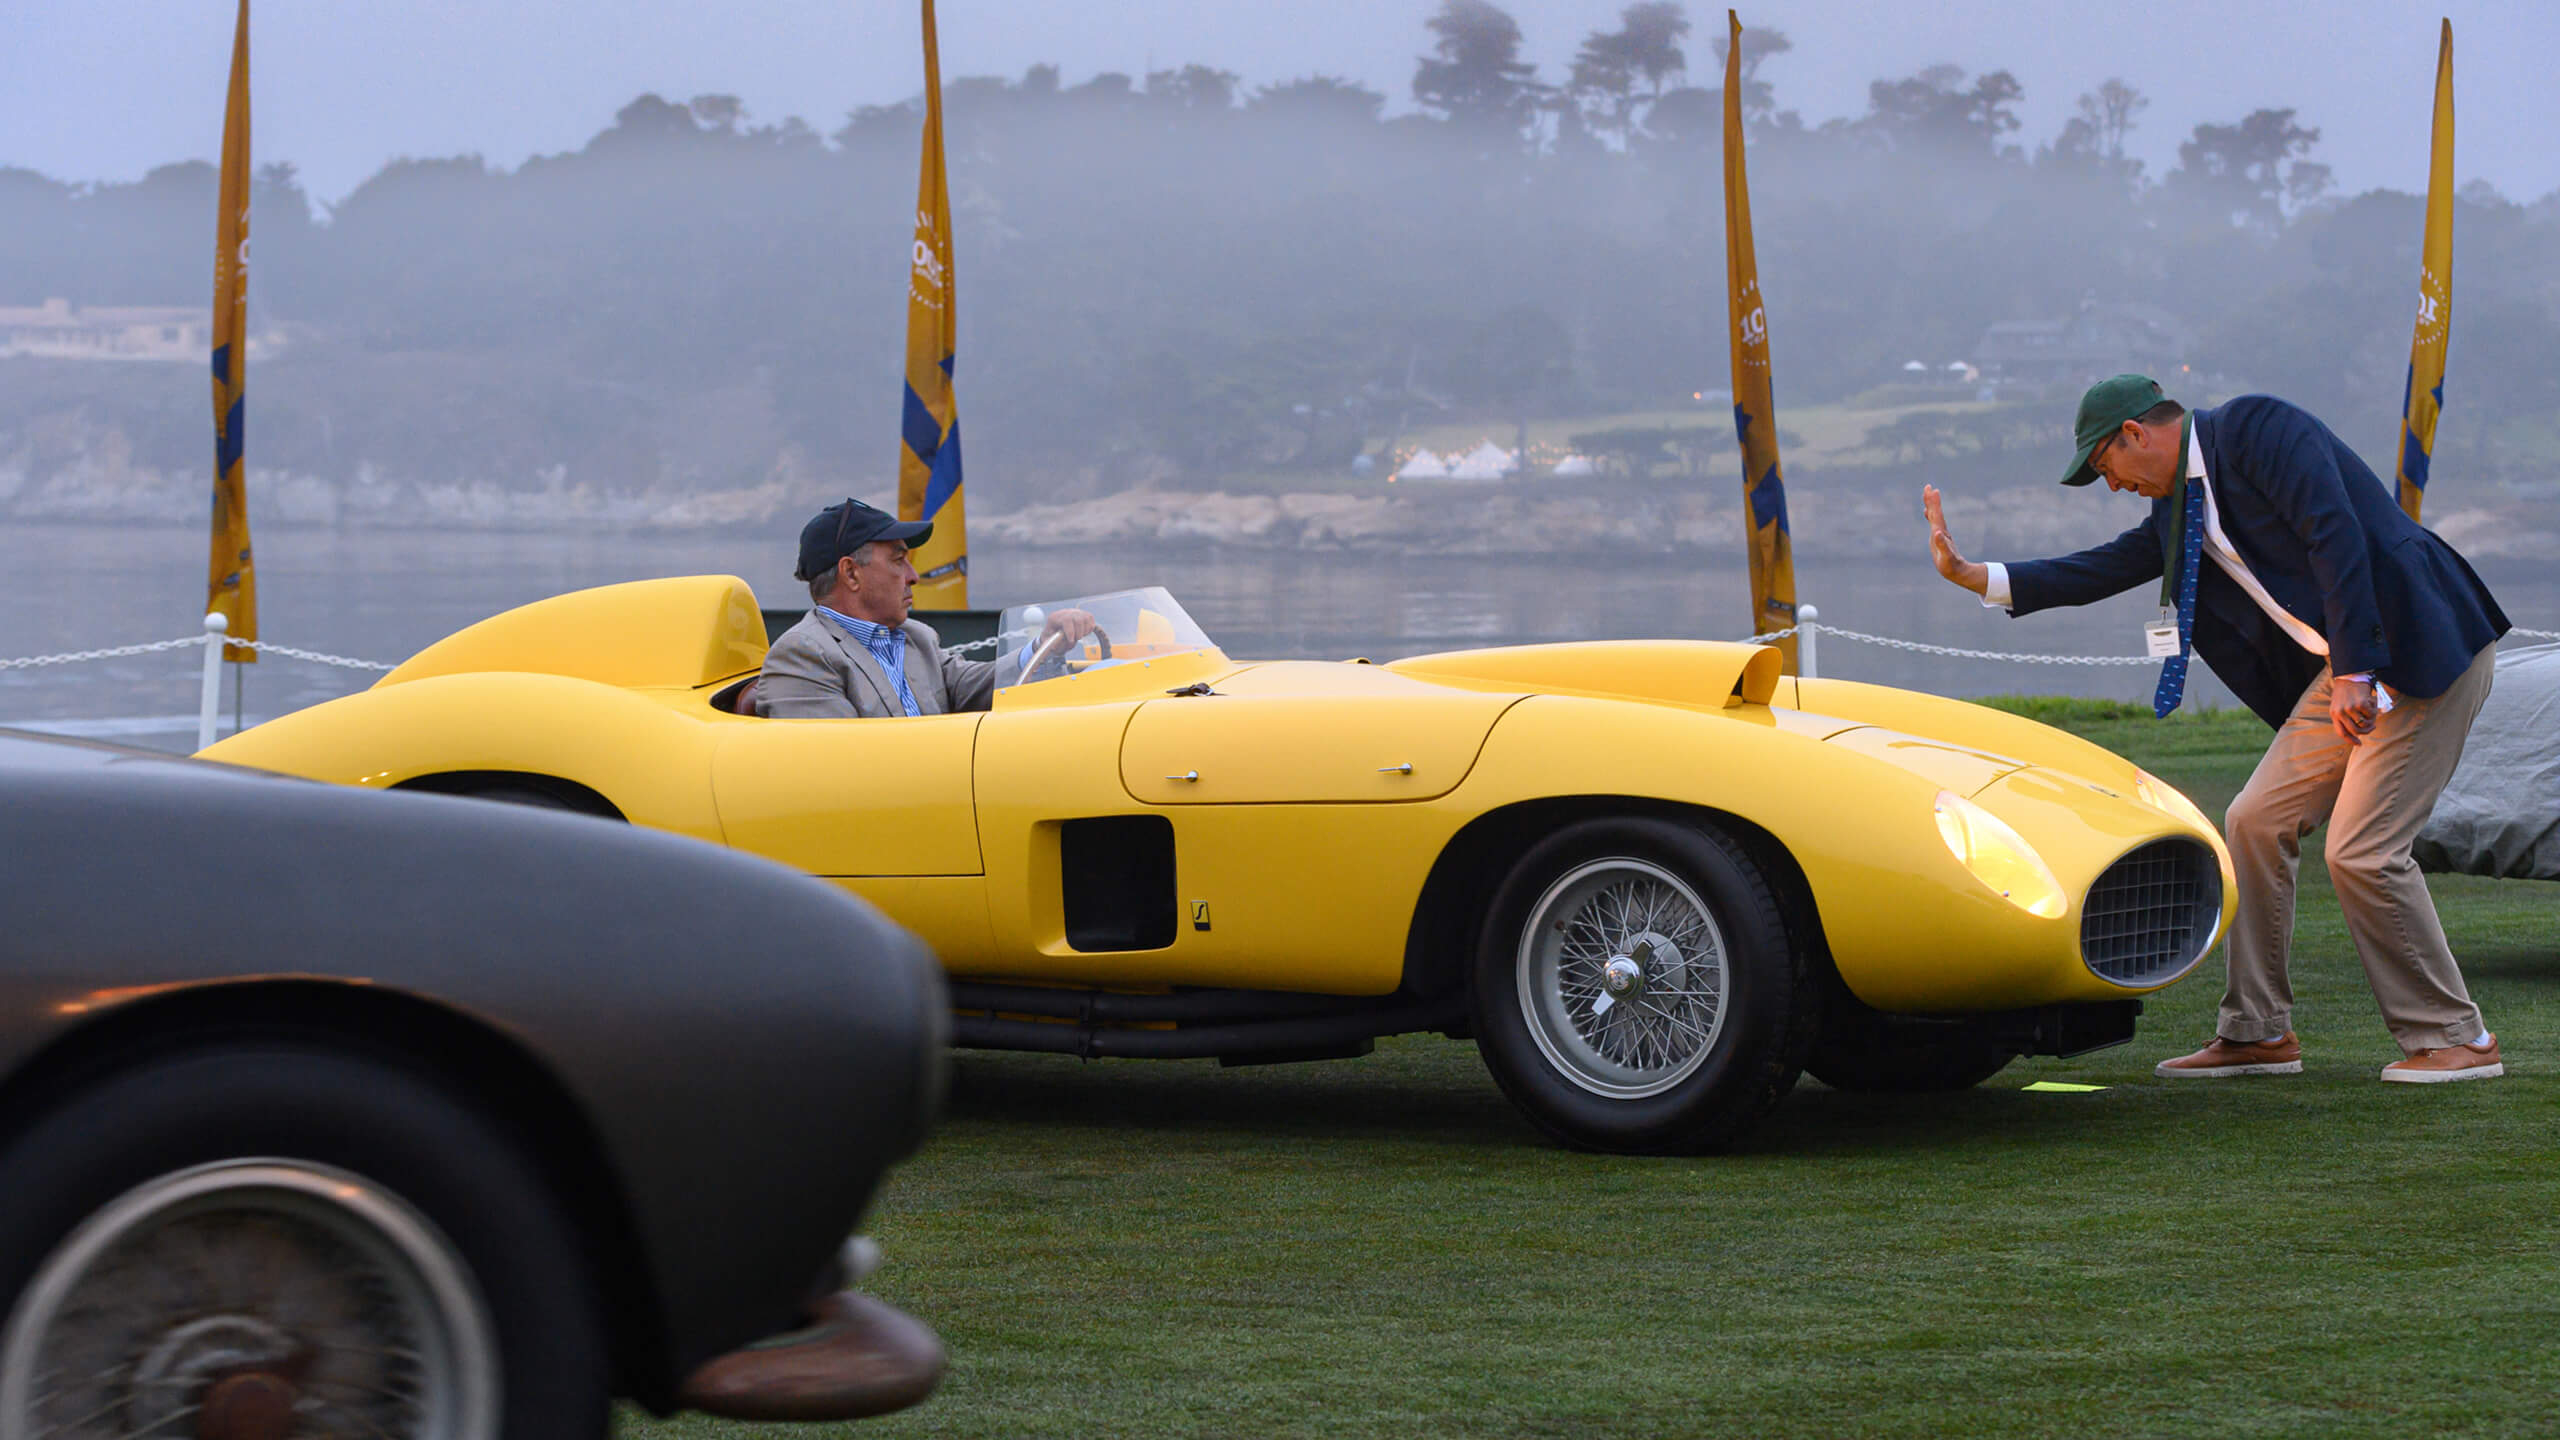 The 2022 Pebble Beach Concours d’Elegance photo gallery